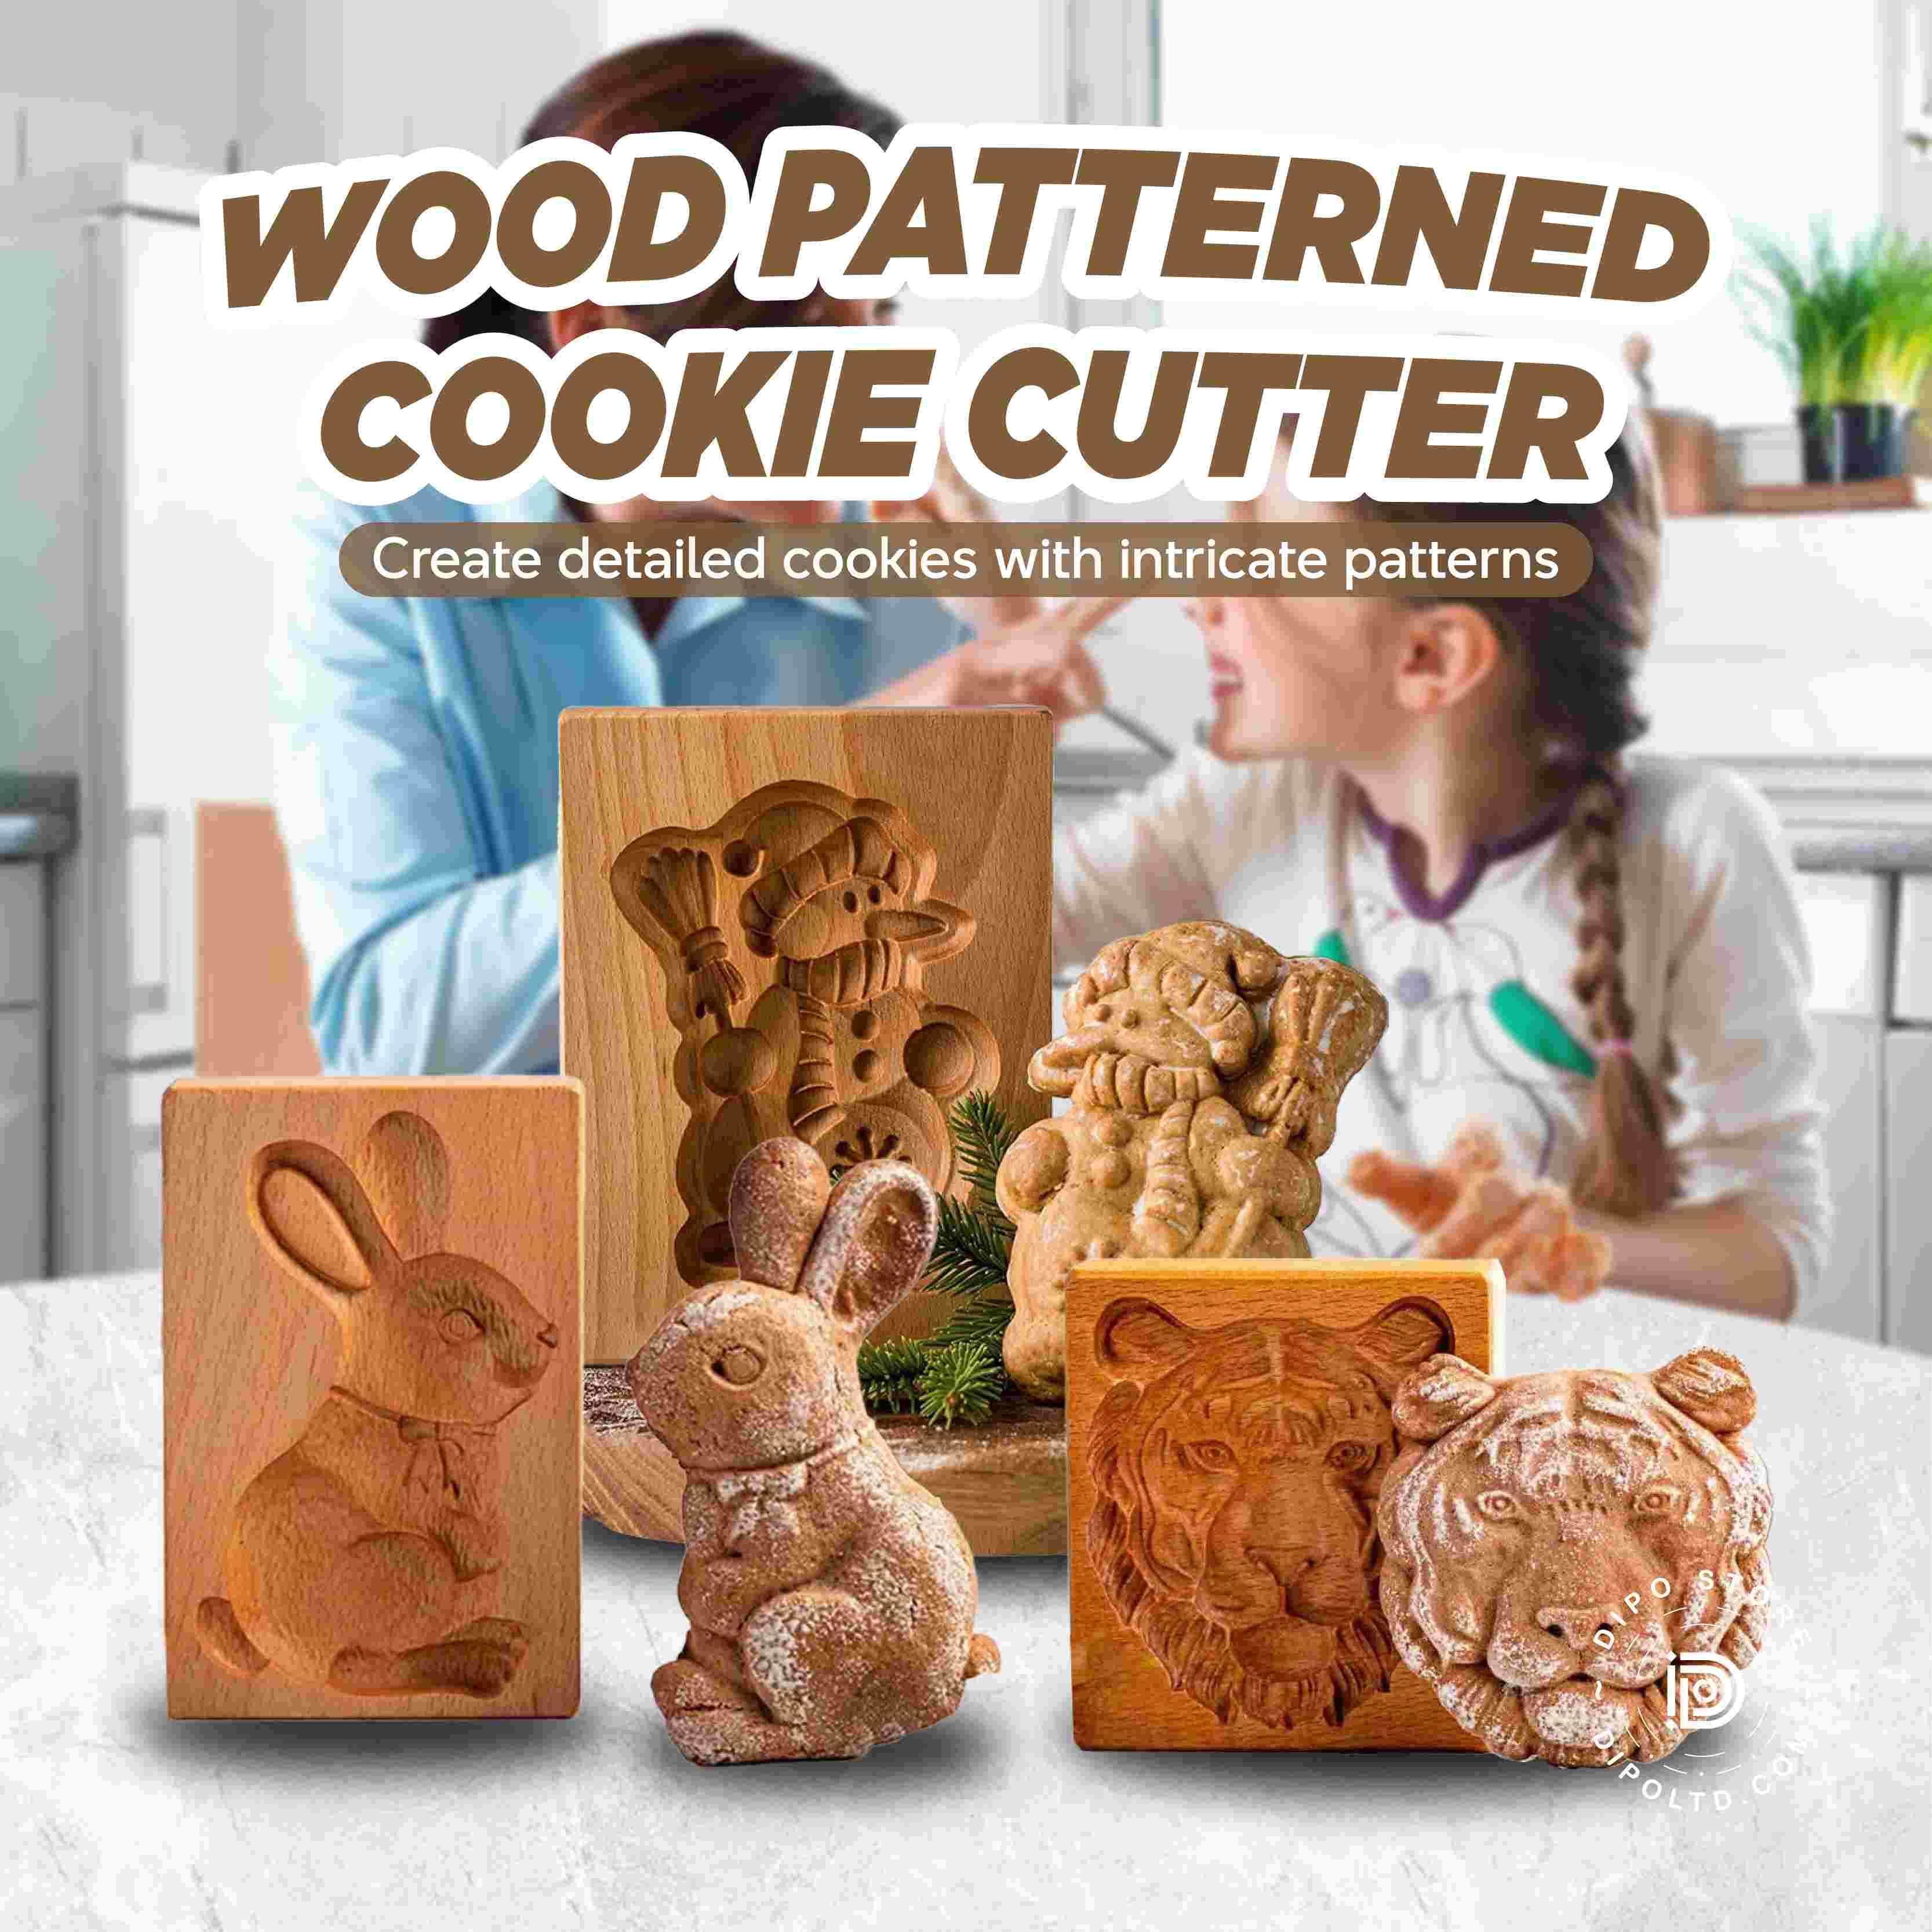 🎄Christmas Promotion - 50% OFF⏰💖Wood Patterned Cookie Cutter - Embossing Mold For Cookies